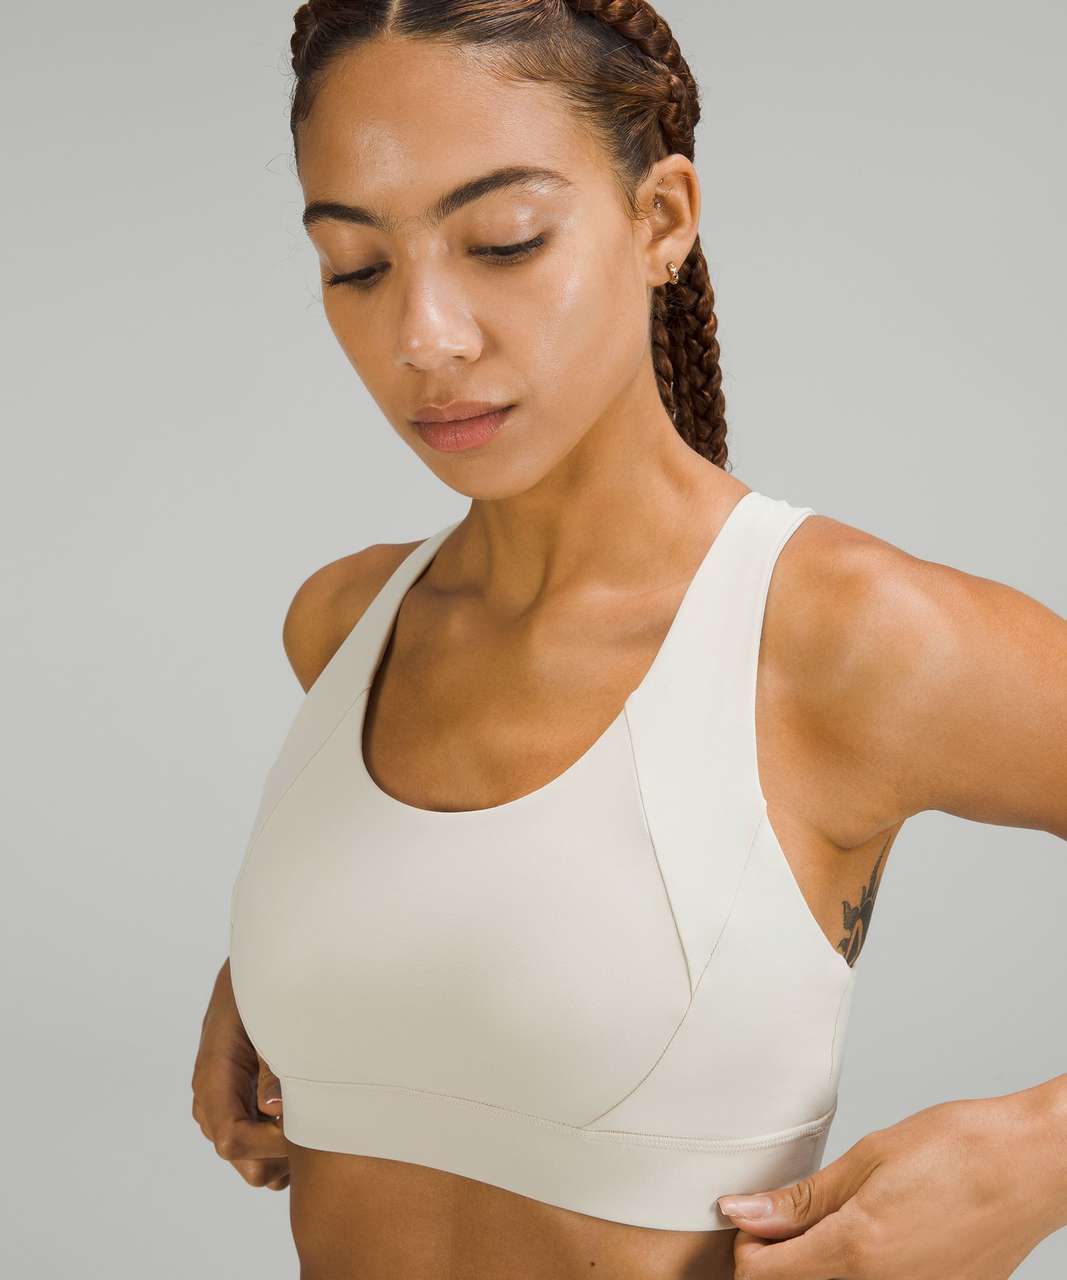 Lululemon Free to Be Elevated Bra *Light Support, DD/DDD(E) Cup - Natural Ivory